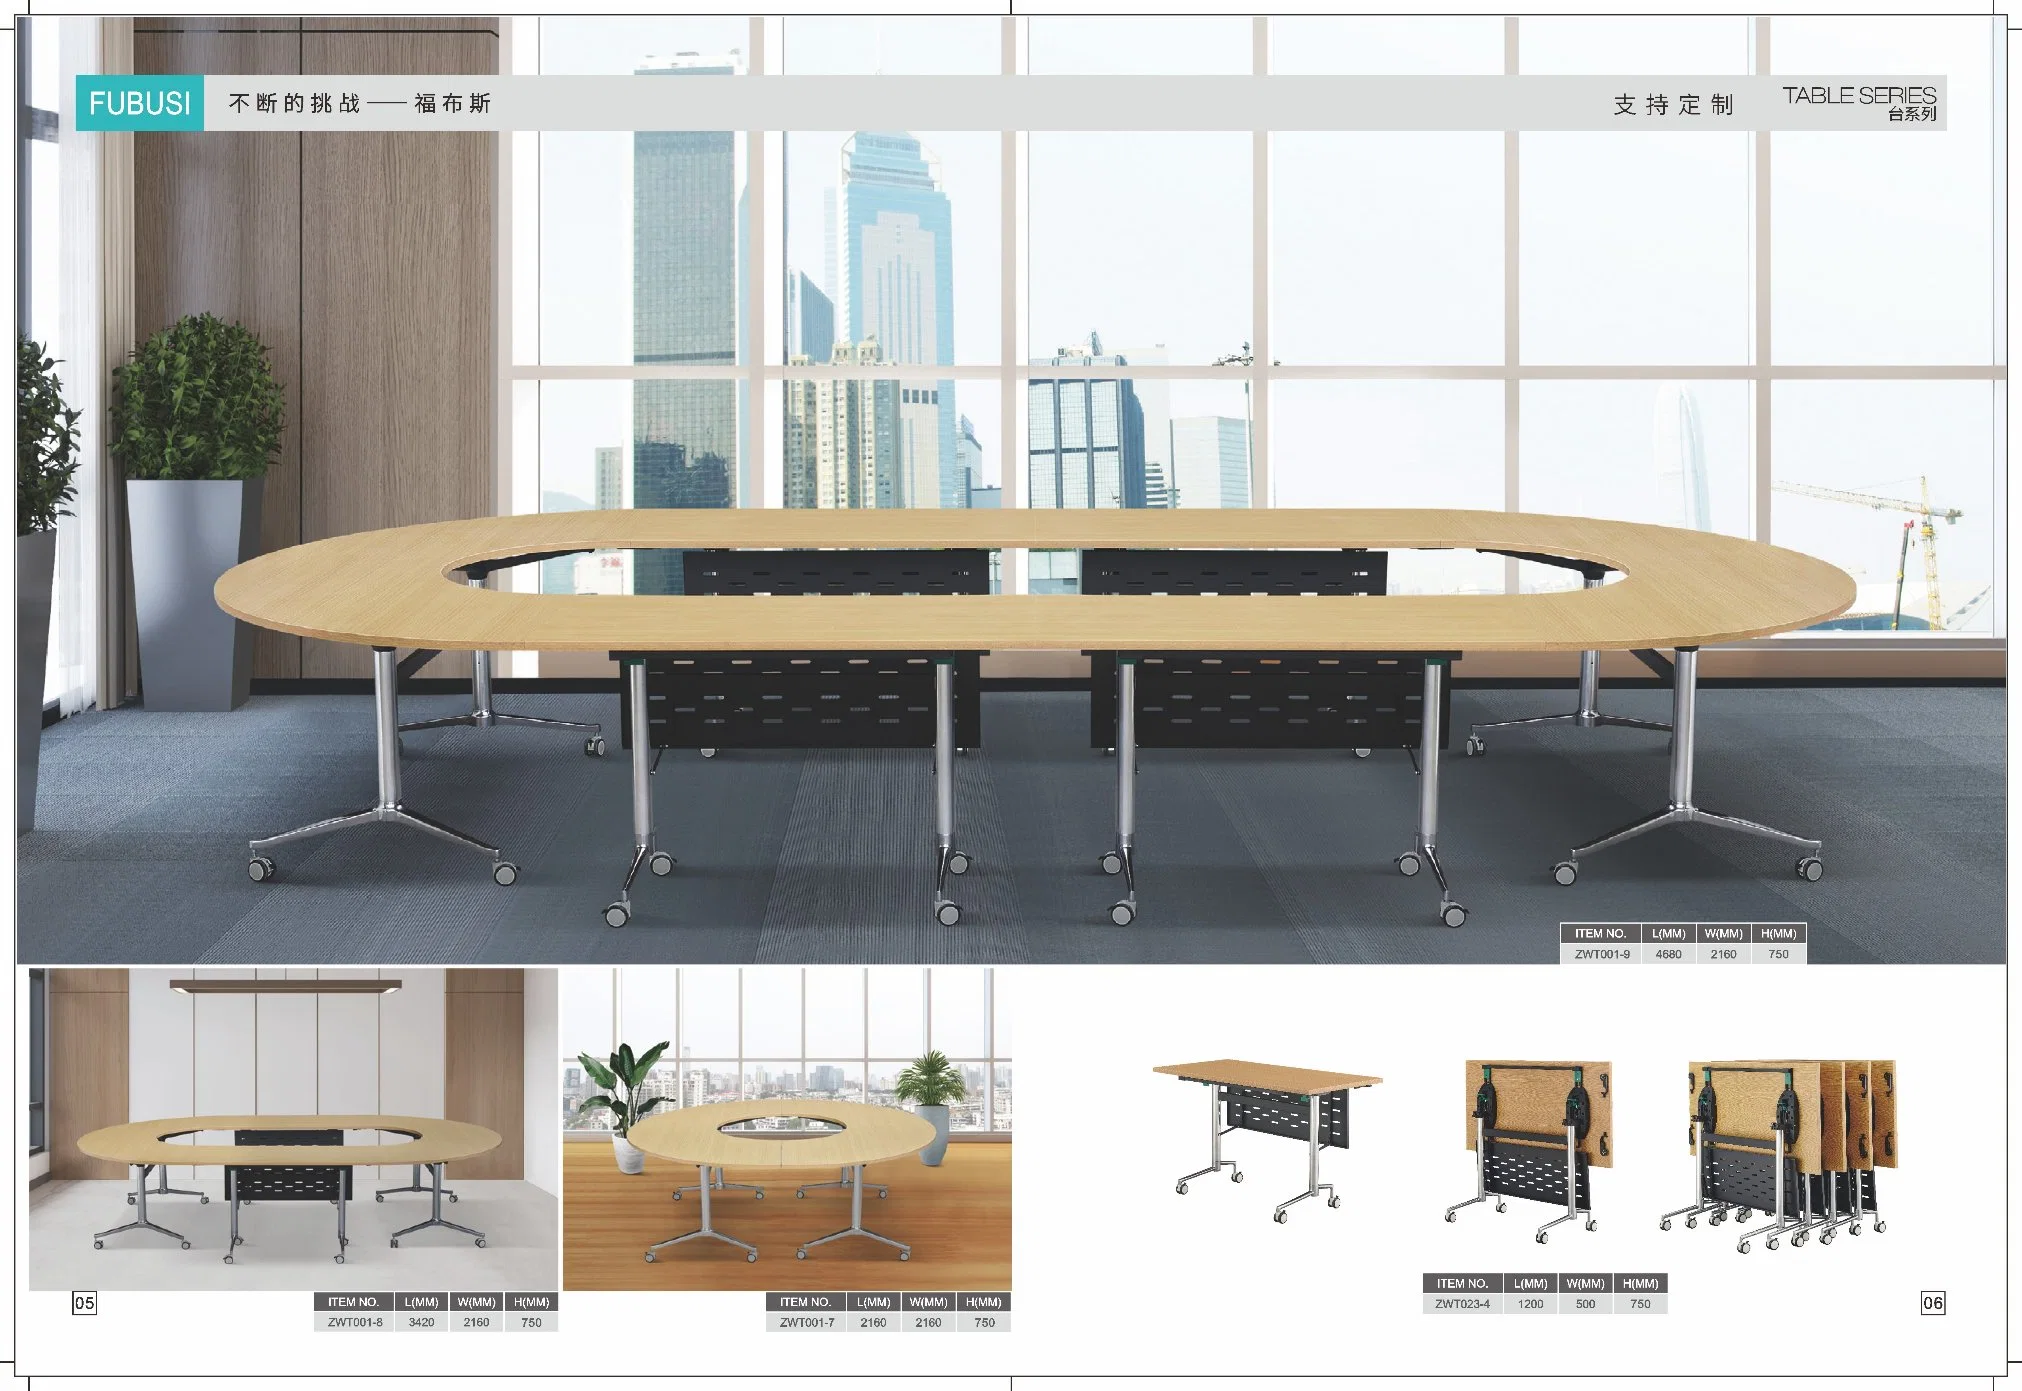 Custom Made Wholesale/Supplier Meeting Table with Chairs Modern Luxury Smart White Oval Shape Conference Table Office Desk